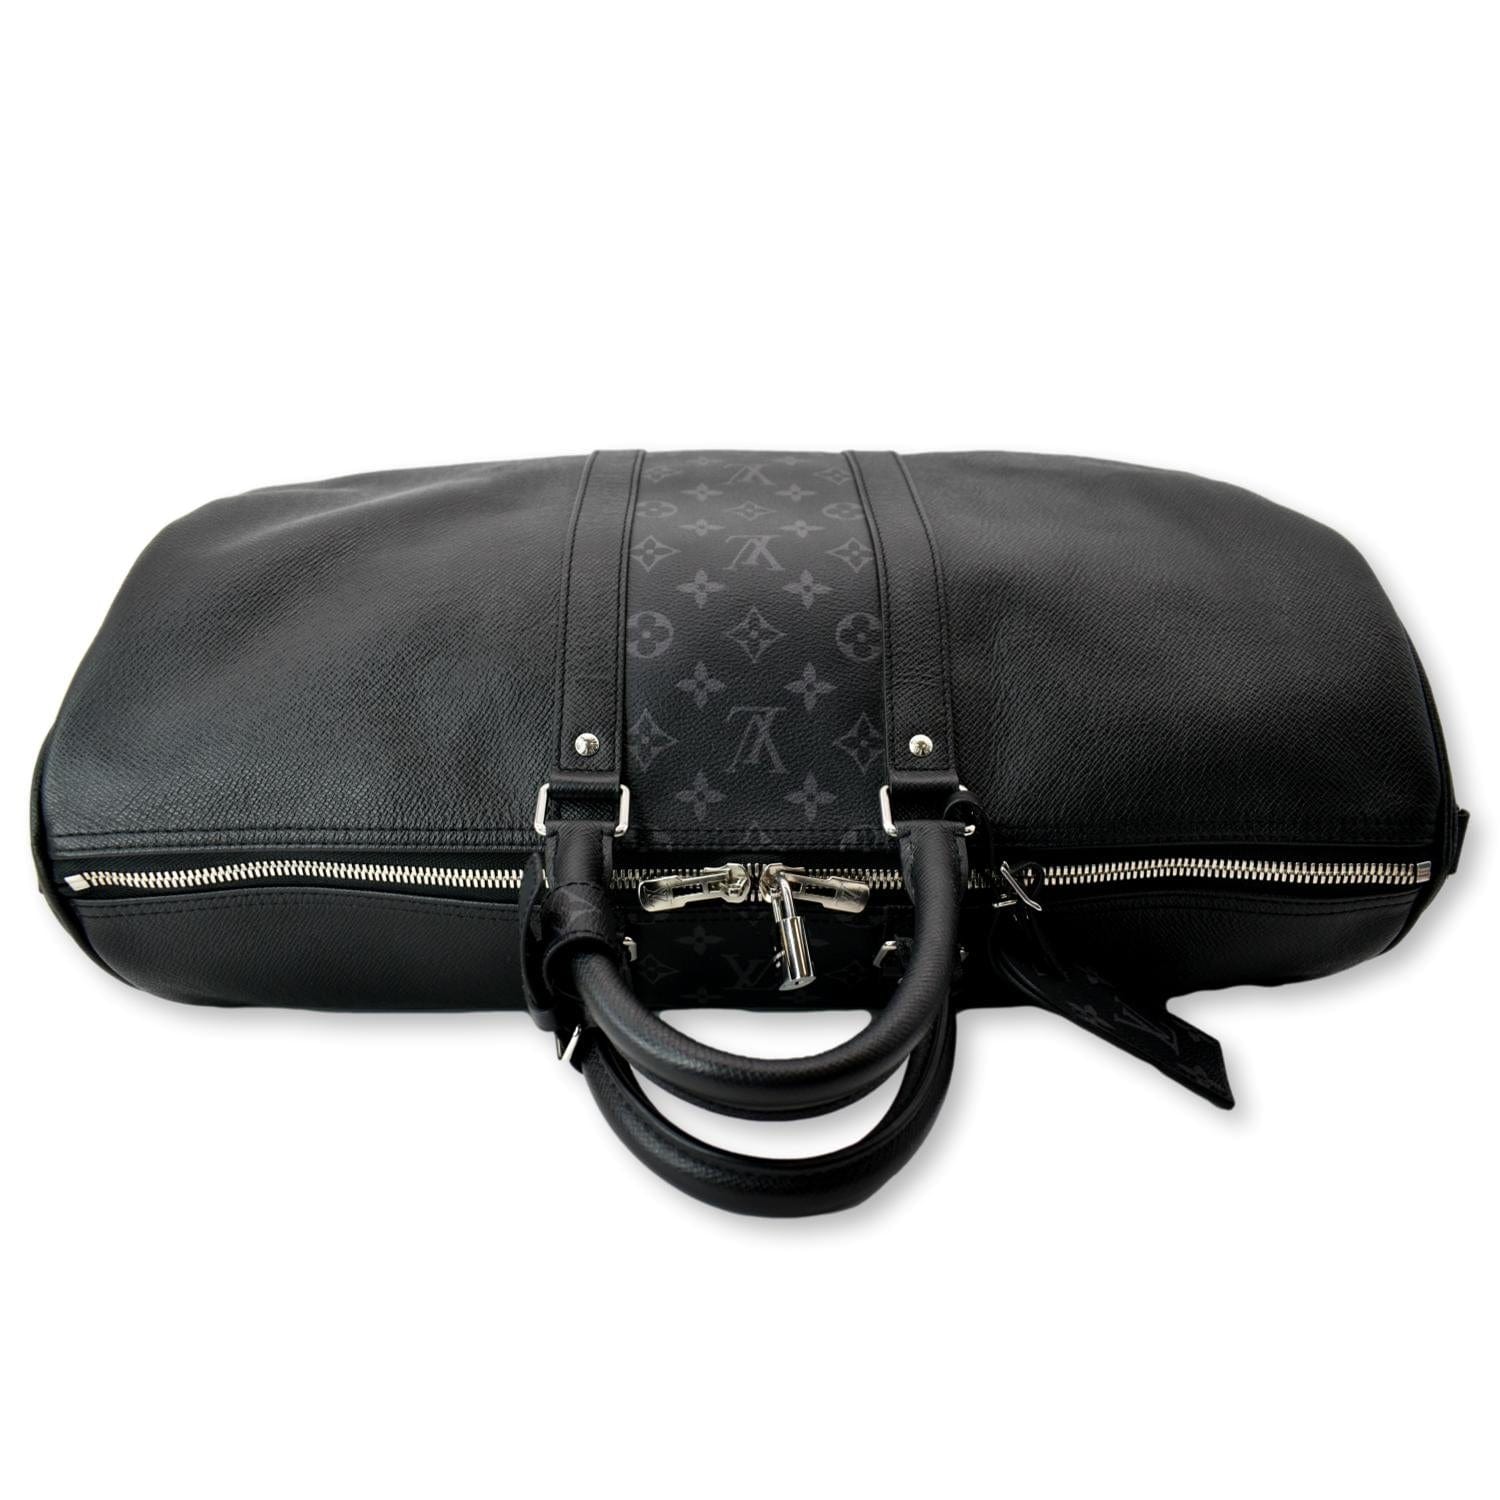 Louis Vuitton Keepall Bandouliere Monogram Bahia Taiga 50 Yellow in Taiga  Leather/Coated Canvas with Silver-tone - US